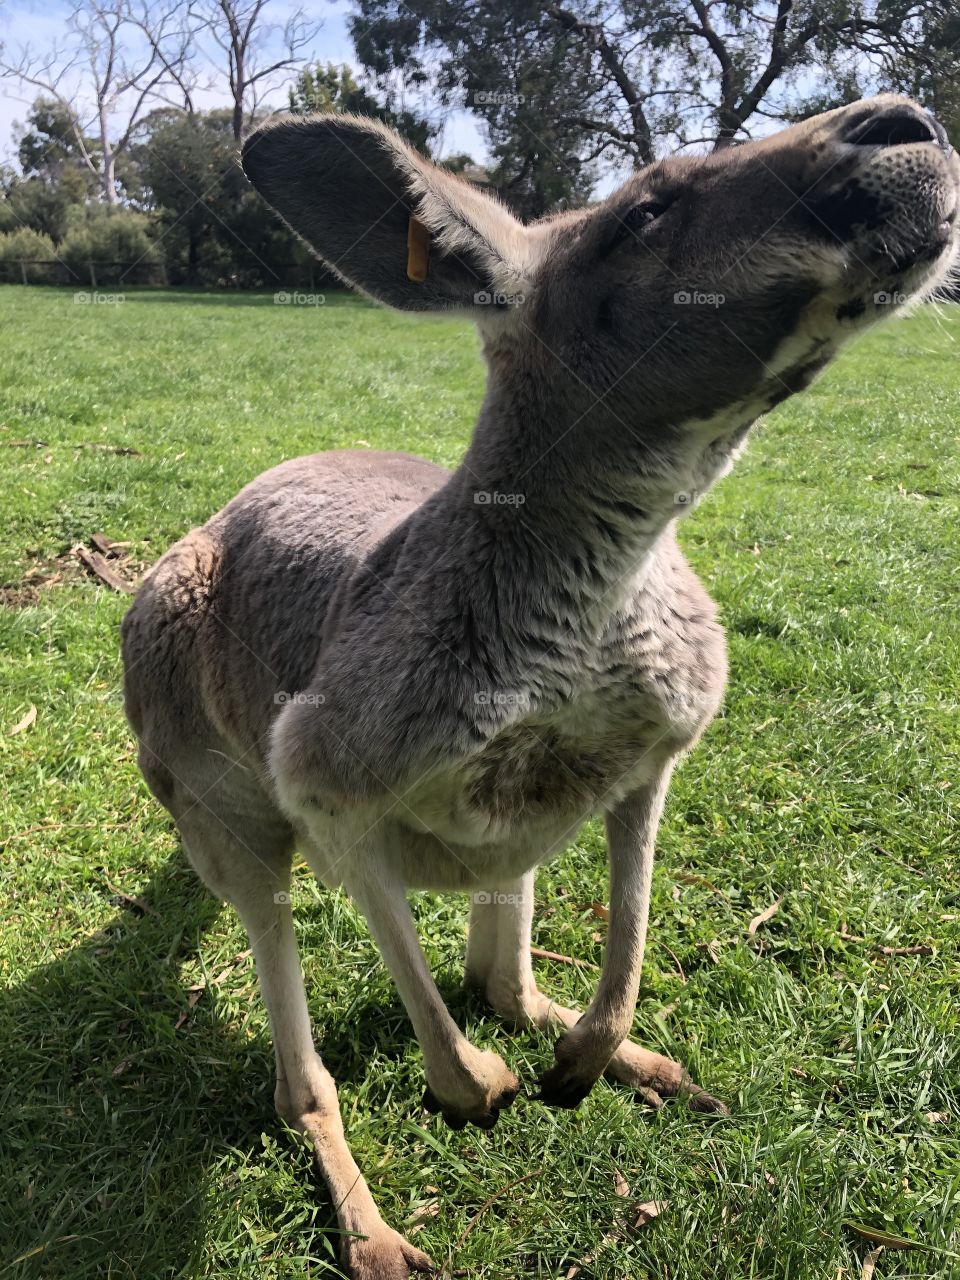 Another photo of the friendly Kangaroo 